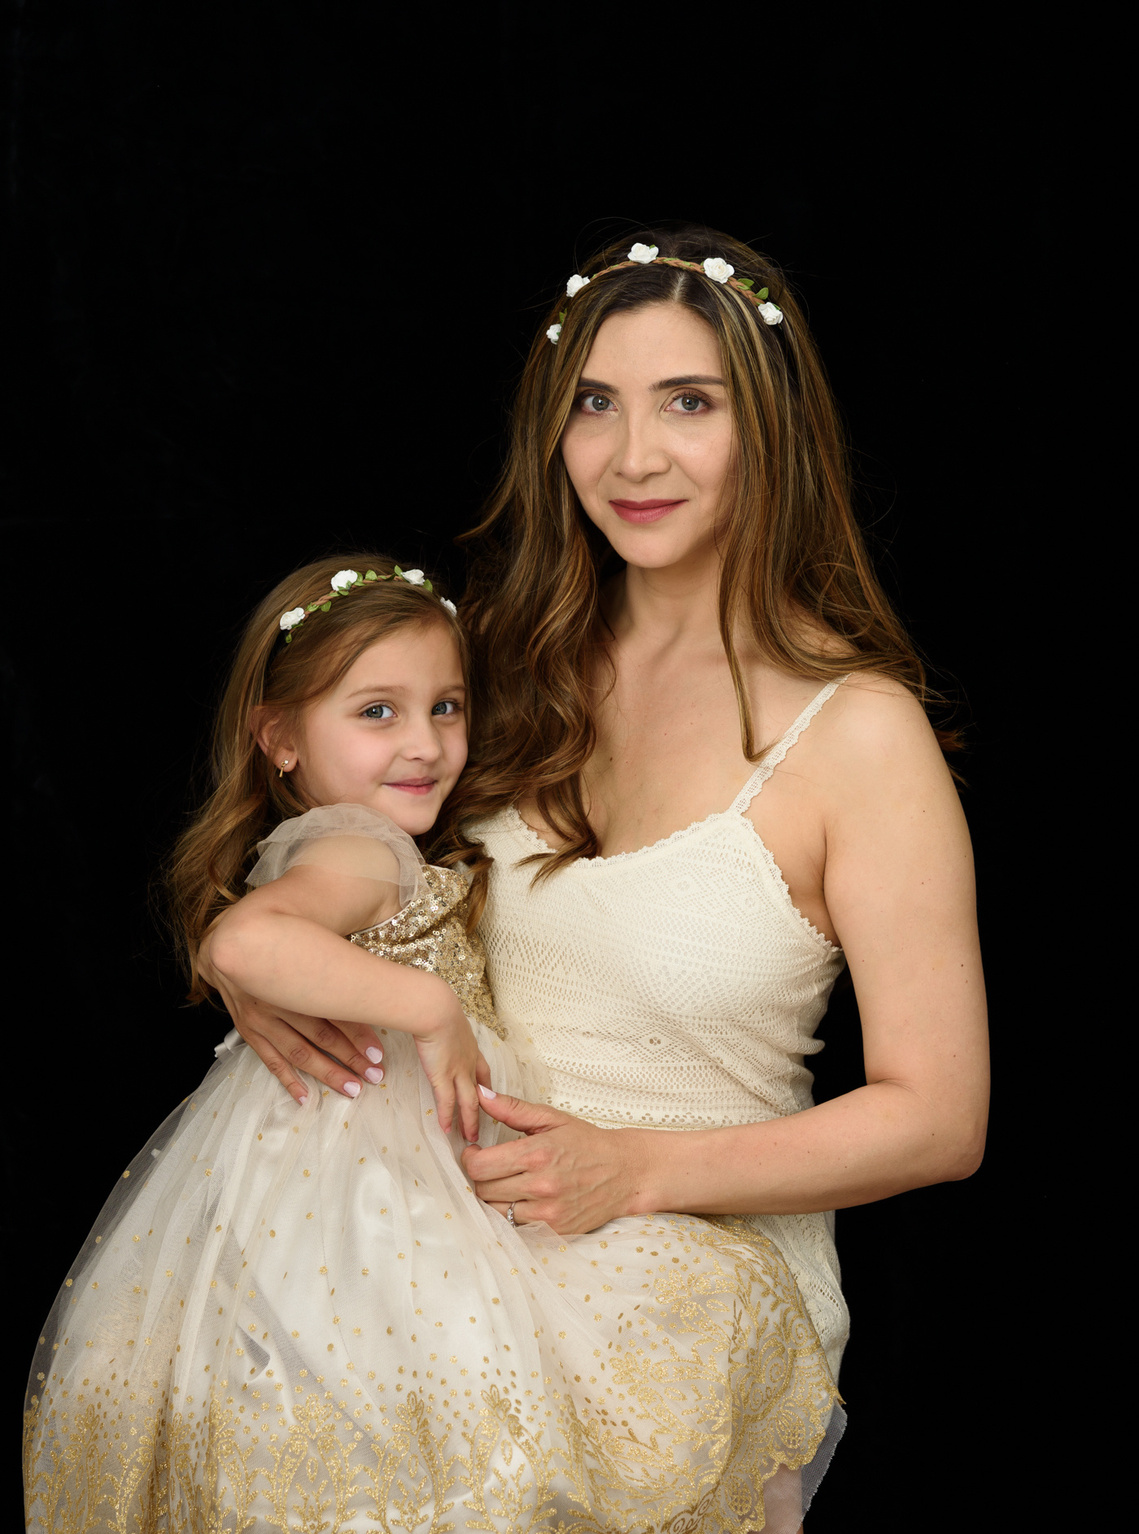 Fine-art Mummy and Me portrait. Mother photographed with her daughter, both wearing cream coloured dresses and flowered headbands. We created Mummy and Me portraits to treasure as Wall Art to remind the family everyday of their love for each other.